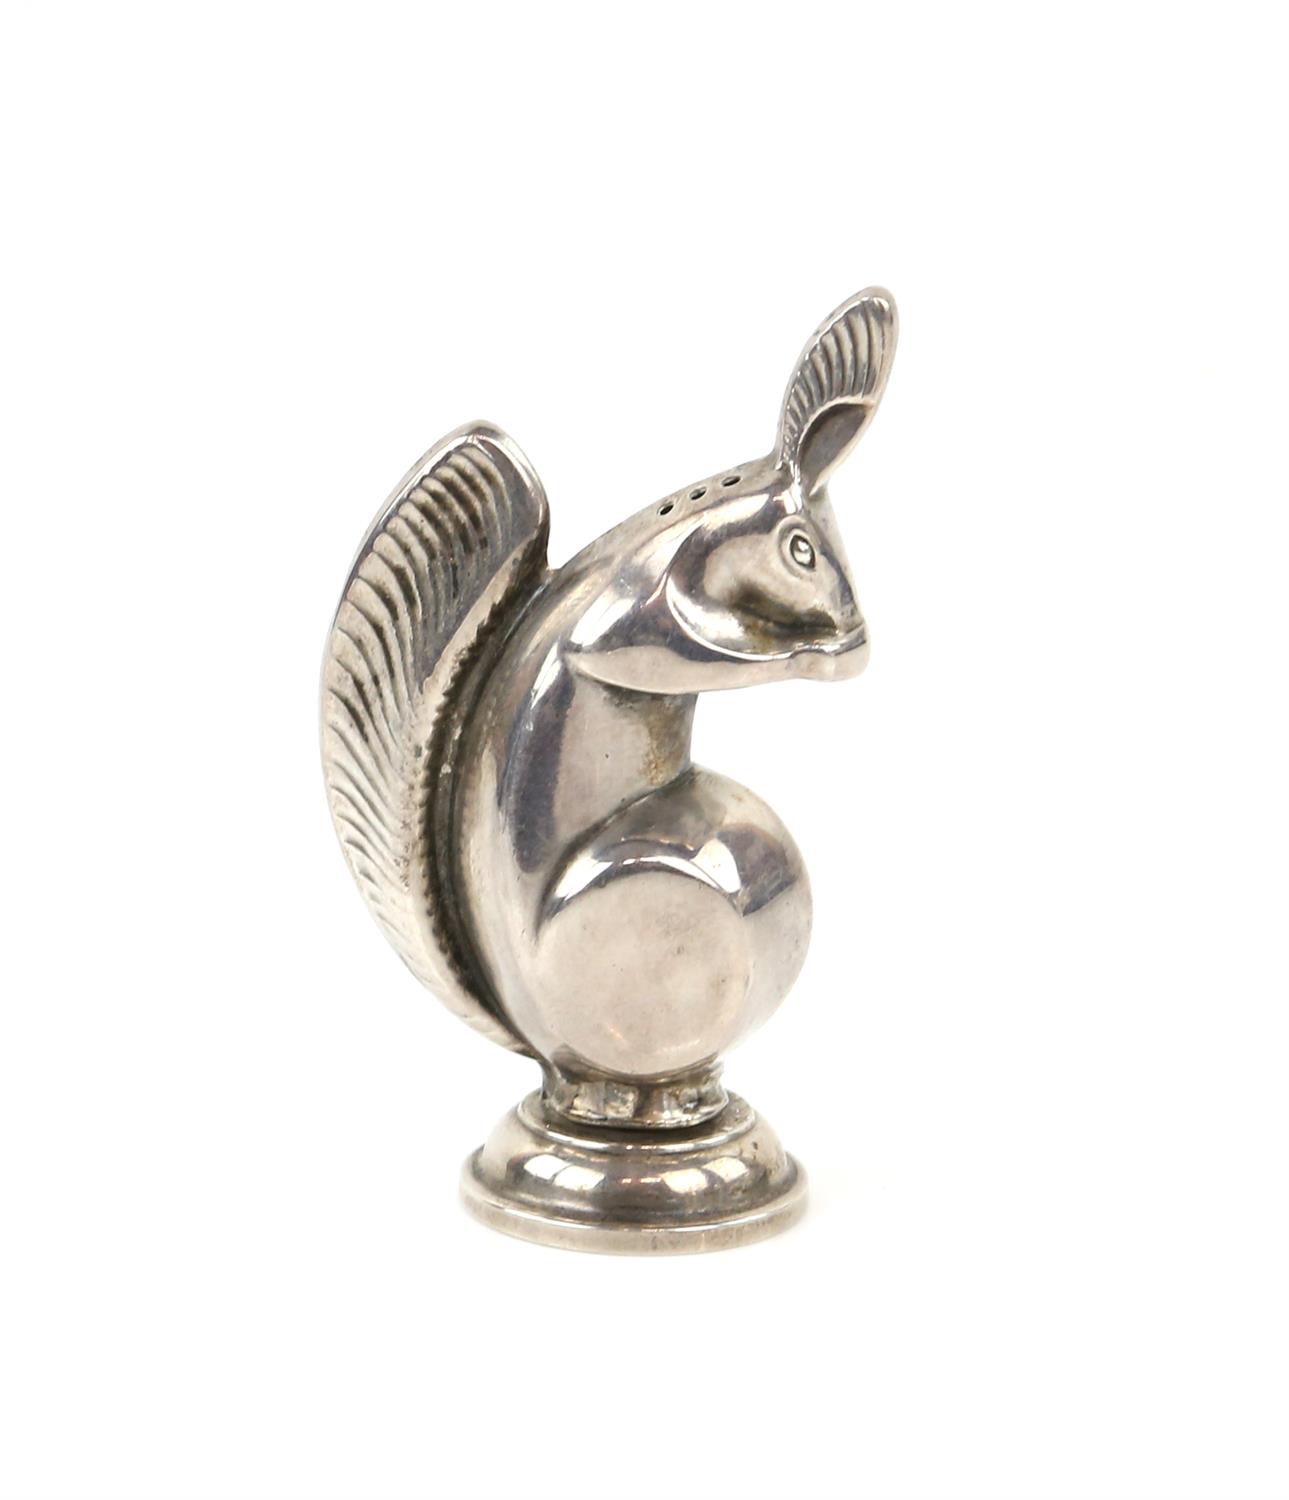 Novelty silver pepper pot cruet in the form of a squirrel eating a nut